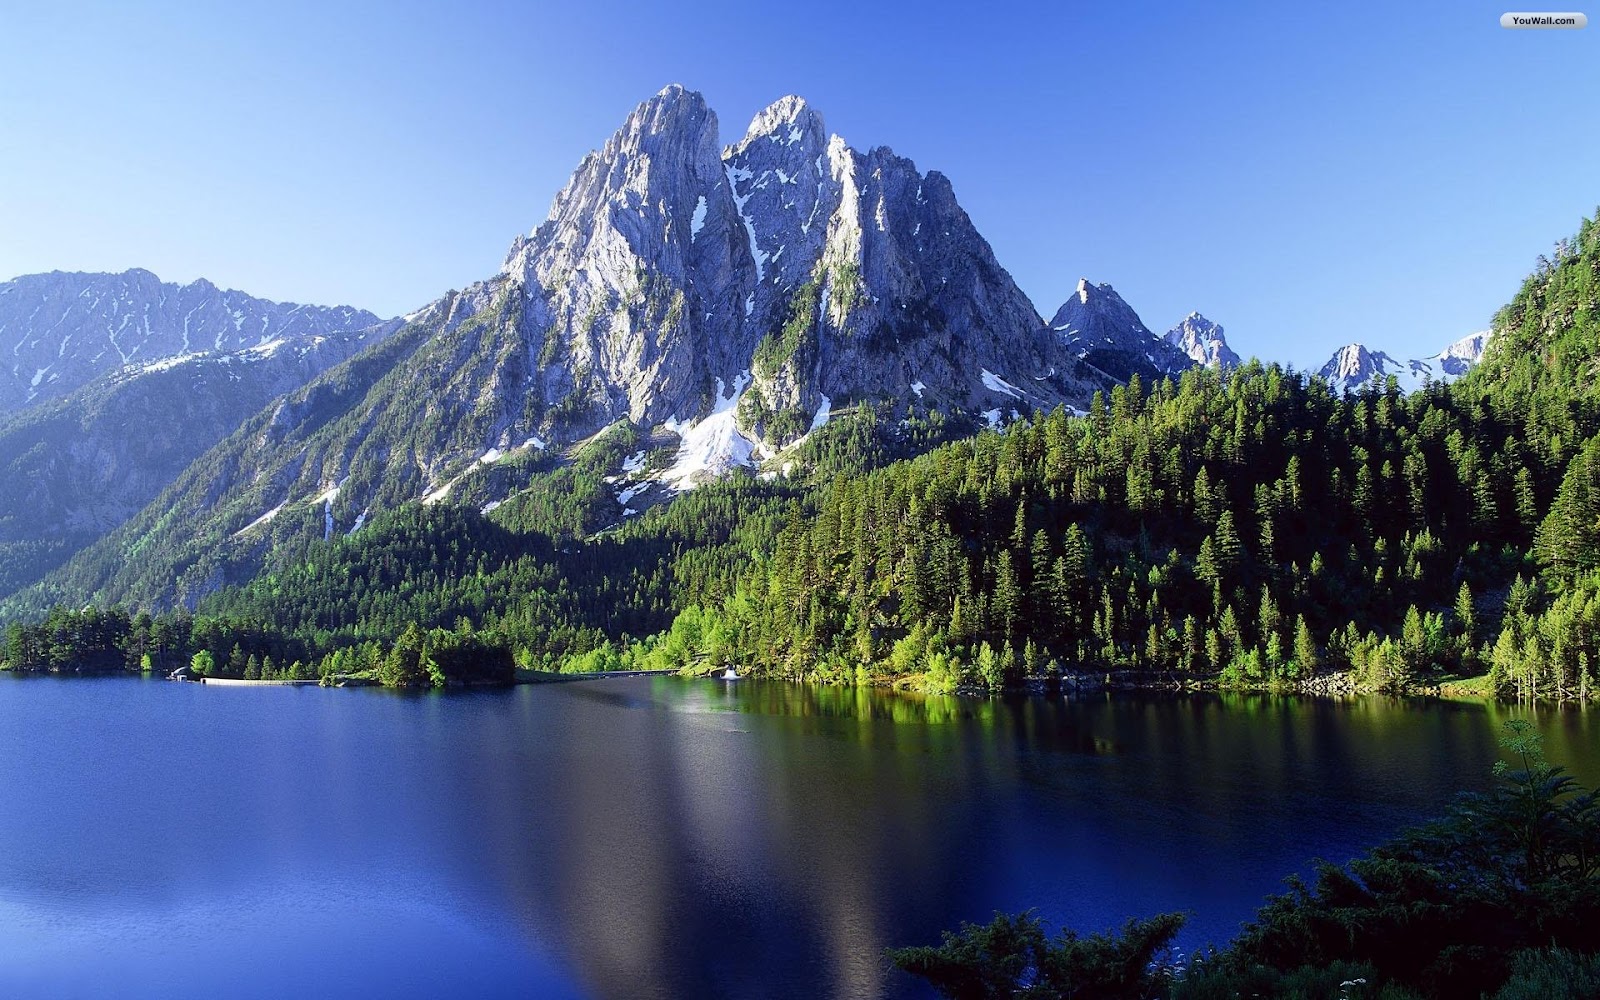 Top 37 Most Beautiful Mountains Wallpapers In HD | HDhut.blogspot ...